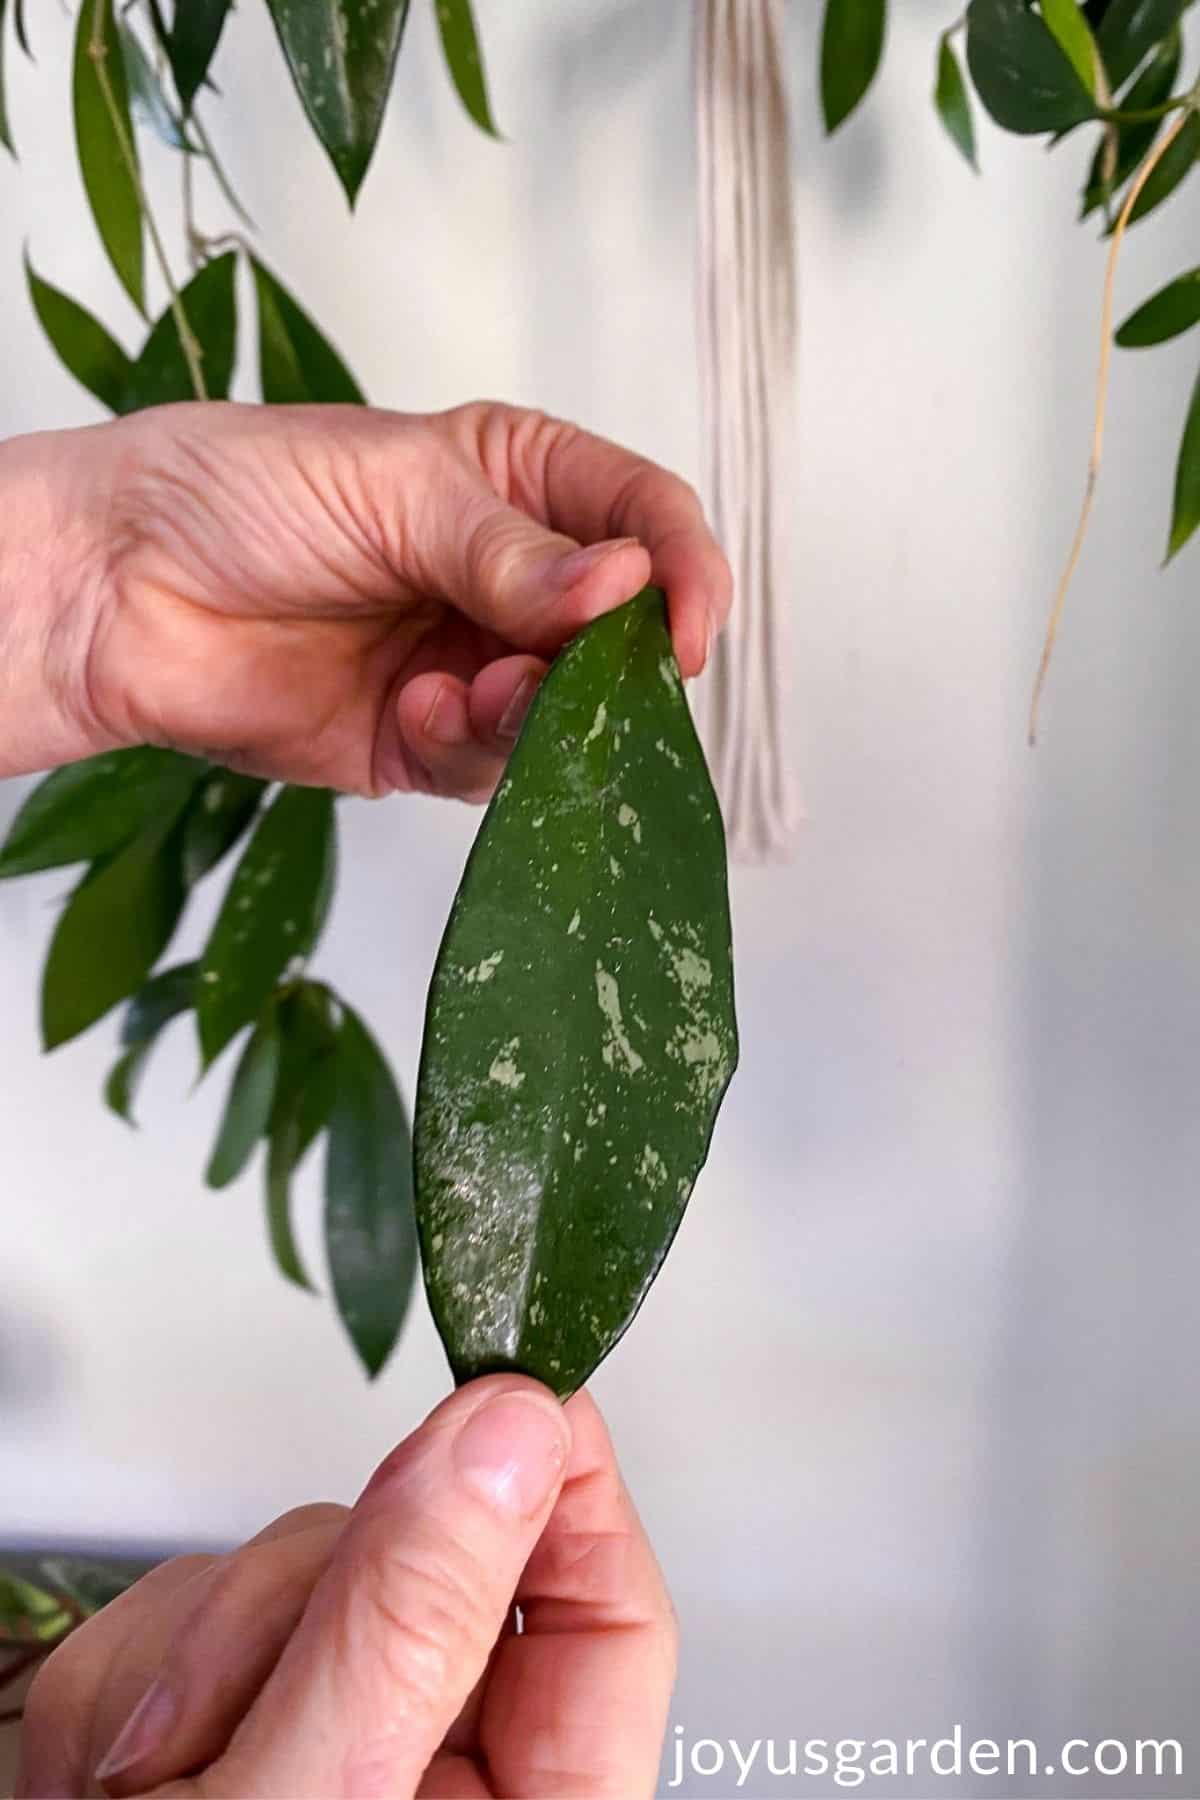 a hand shown holding hoya leaf with sooty mold growing on the nectar secreted by aphids on hoya leaf